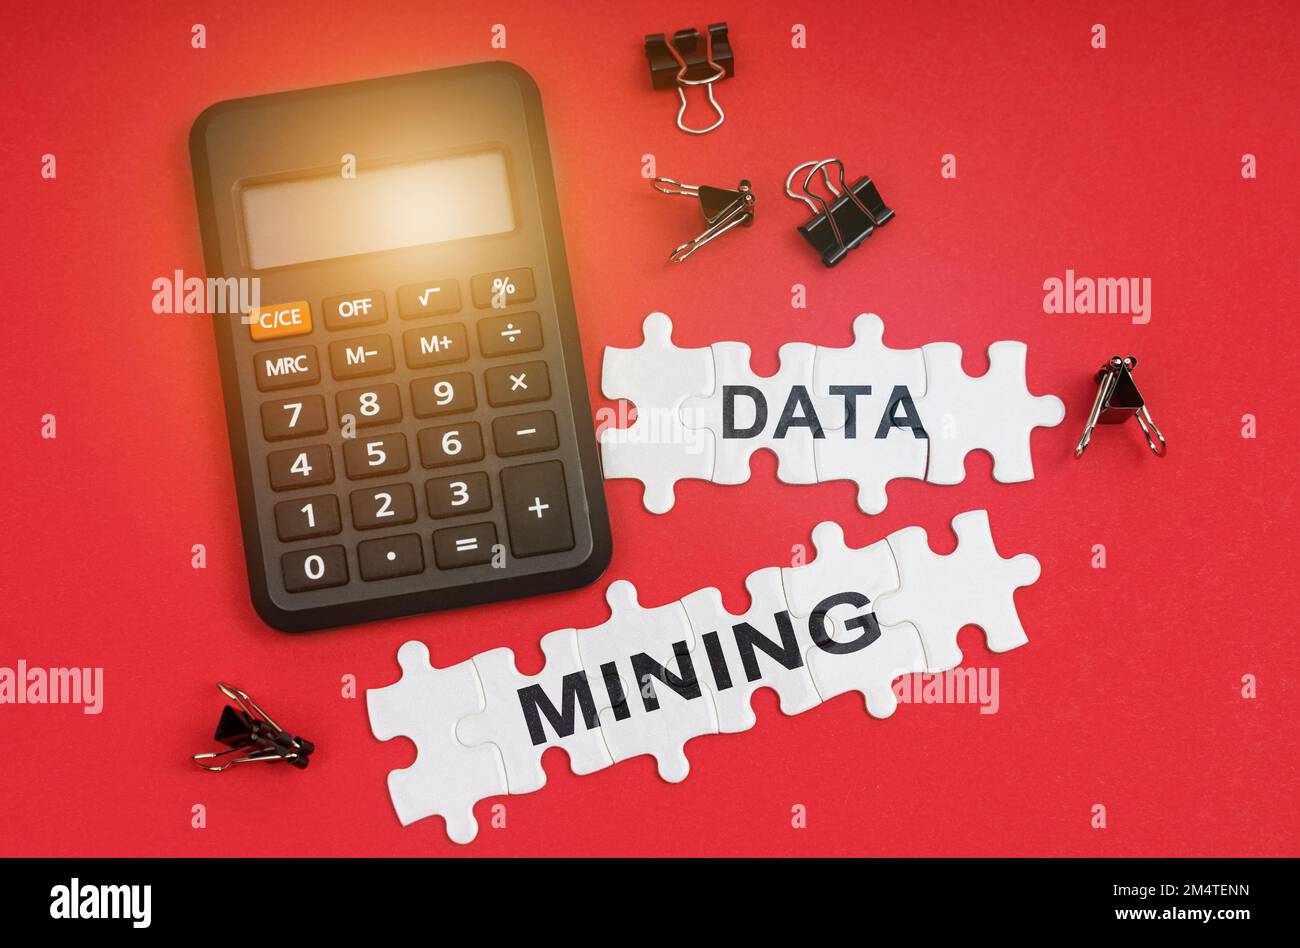 Finance and economy concept. On the red surface are a calculator, clamps and puzzles with the inscription - DATA MINING Stock Photo